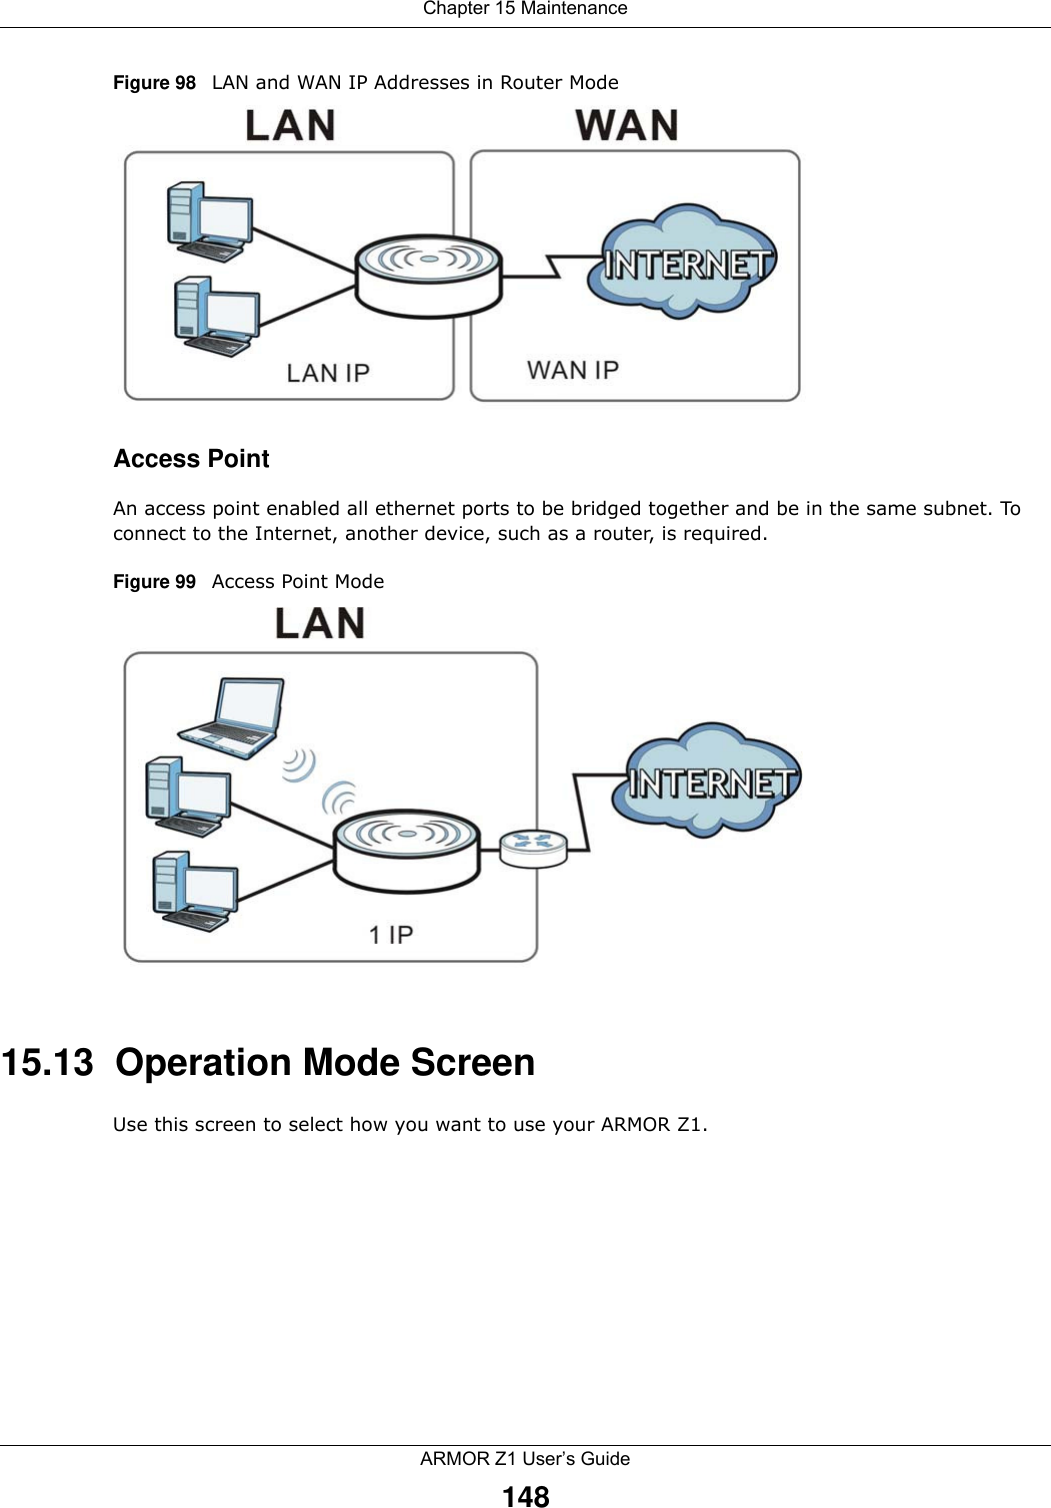 Chapter 15 MaintenanceARMOR Z1 User’s Guide148Figure 98   LAN and WAN IP Addresses in Router ModeAccess PointAn access point enabled all ethernet ports to be bridged together and be in the same subnet. To connect to the Internet, another device, such as a router, is required.Figure 99   Access Point Mode15.13  Operation Mode ScreenUse this screen to select how you want to use your ARMOR Z1. 